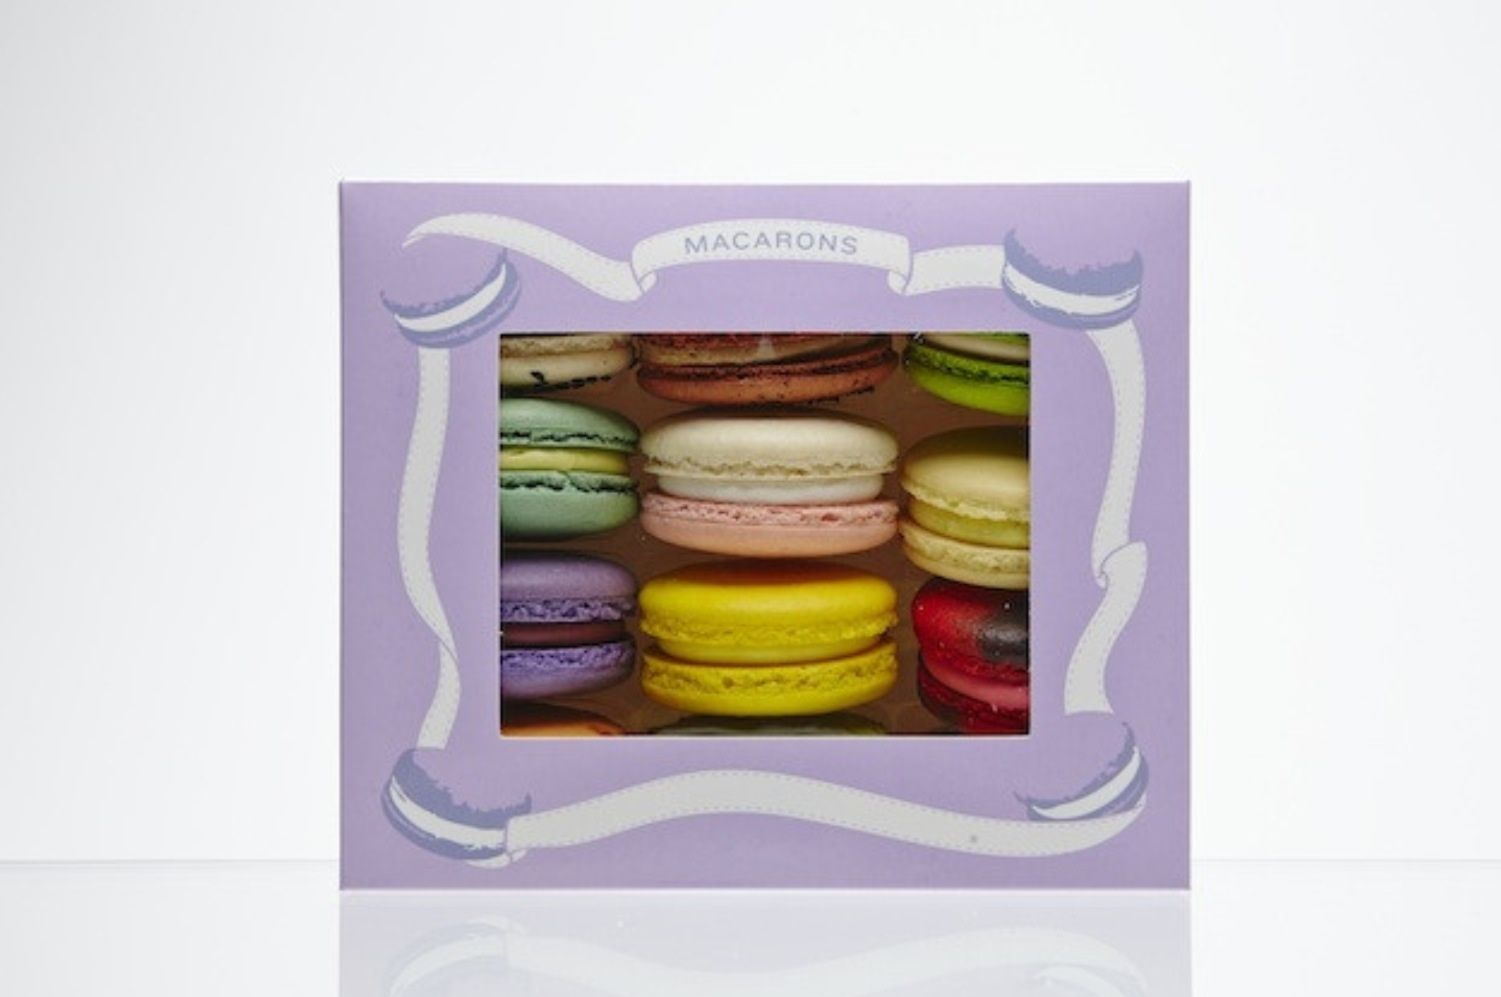 Macaronsfrom Cafe MoRoCo  6 for $19.50 12 for $34.50 